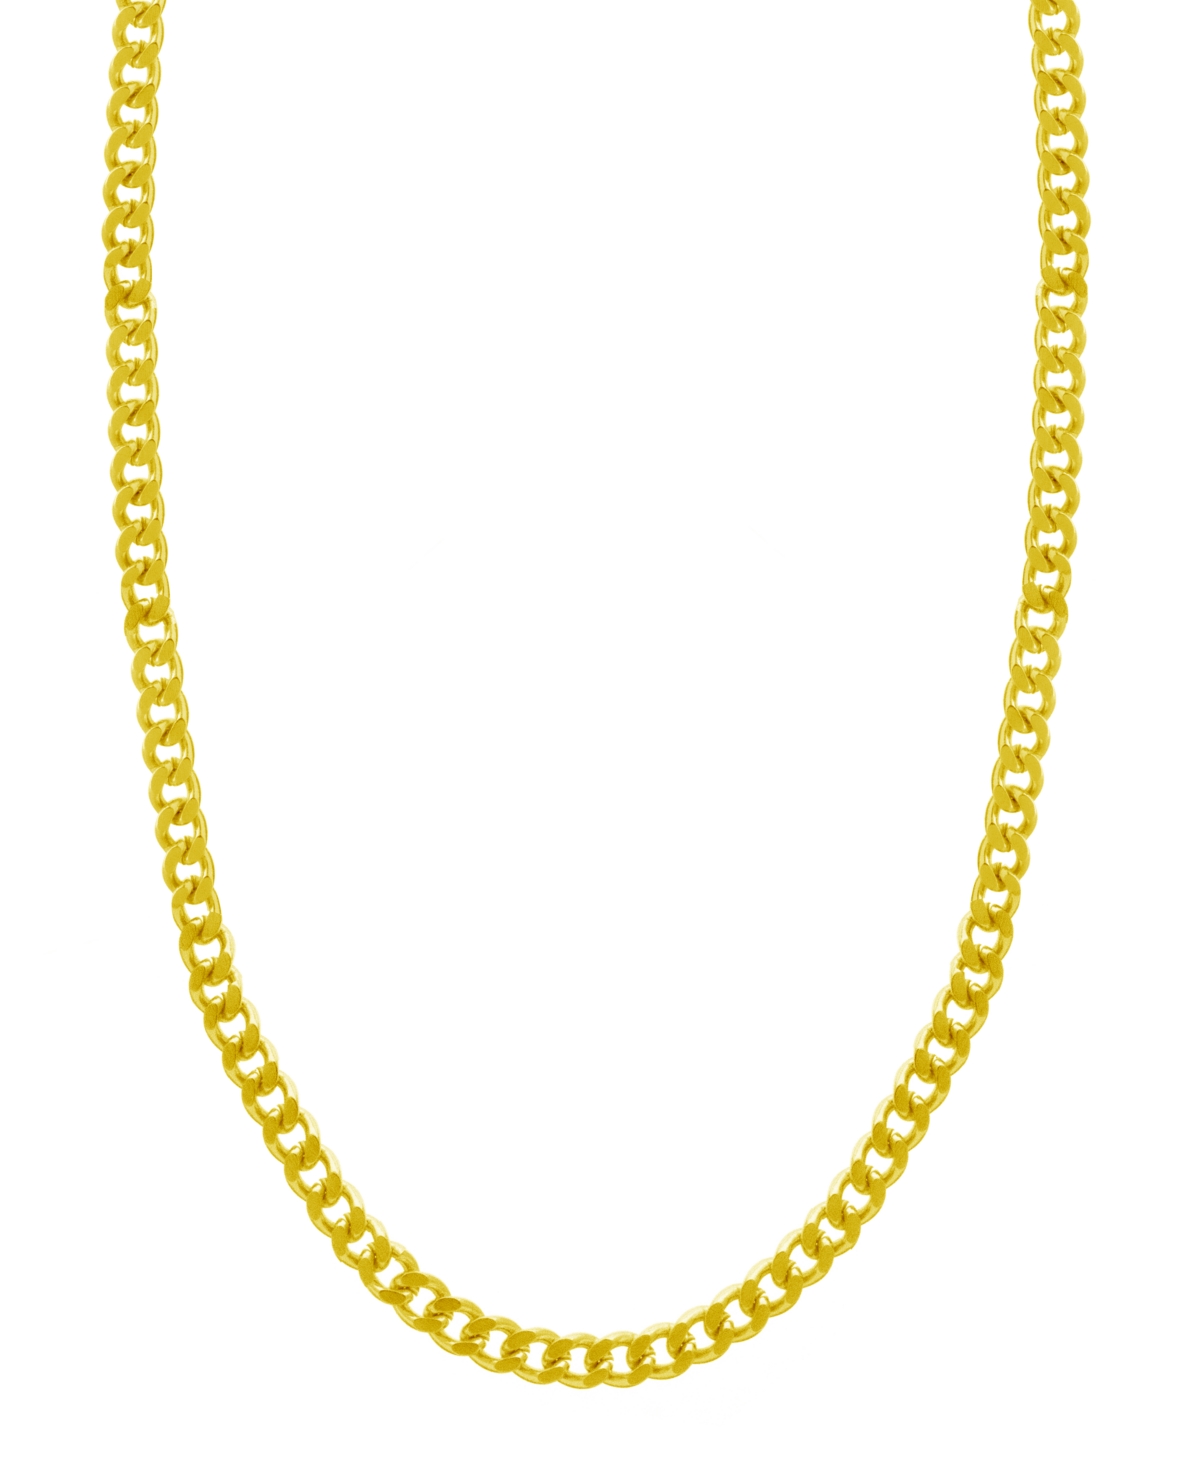 Curb Chain Necklace, Gold Plate and Silver Plate 18" - Silver-Tone